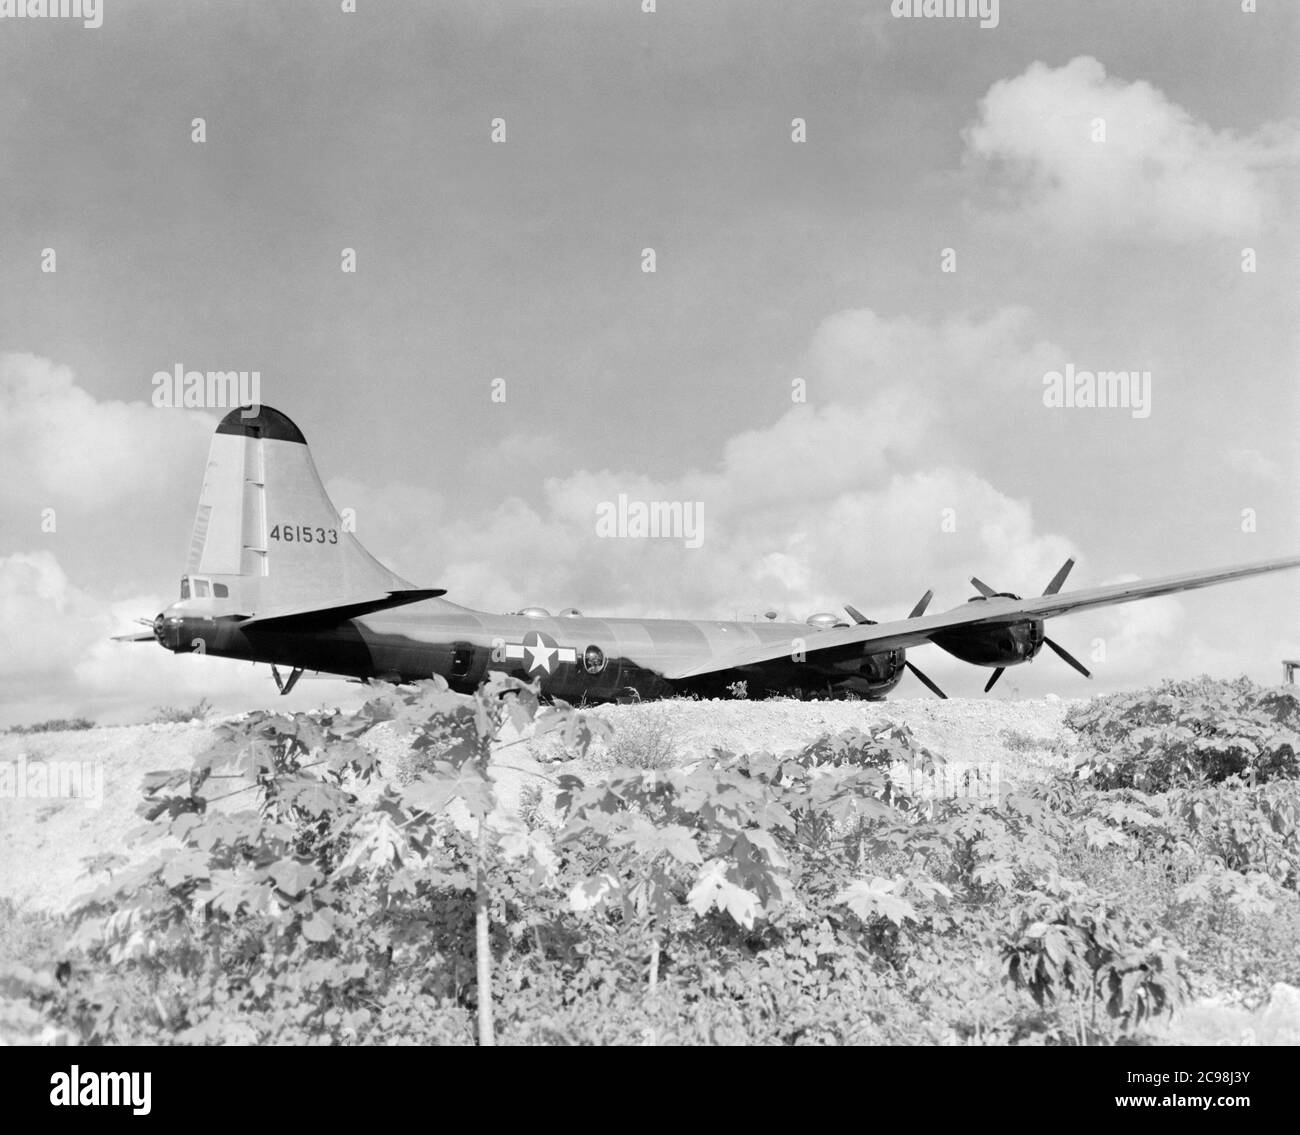 Boeing B-29 Superfortress 461553 on the flightline. Northfield, Guam, July 1945. As the 75th anniversary of V-J Day approaches, The Consoli Collection has published four photo essays by U.S. Navy Lt. (j.g.) Joseph J. Consoli. The photos were taken between July and December 1945 in the Mariana Islands. They document U.S. Navy life before and after the Japanese surrender. Stock Photo